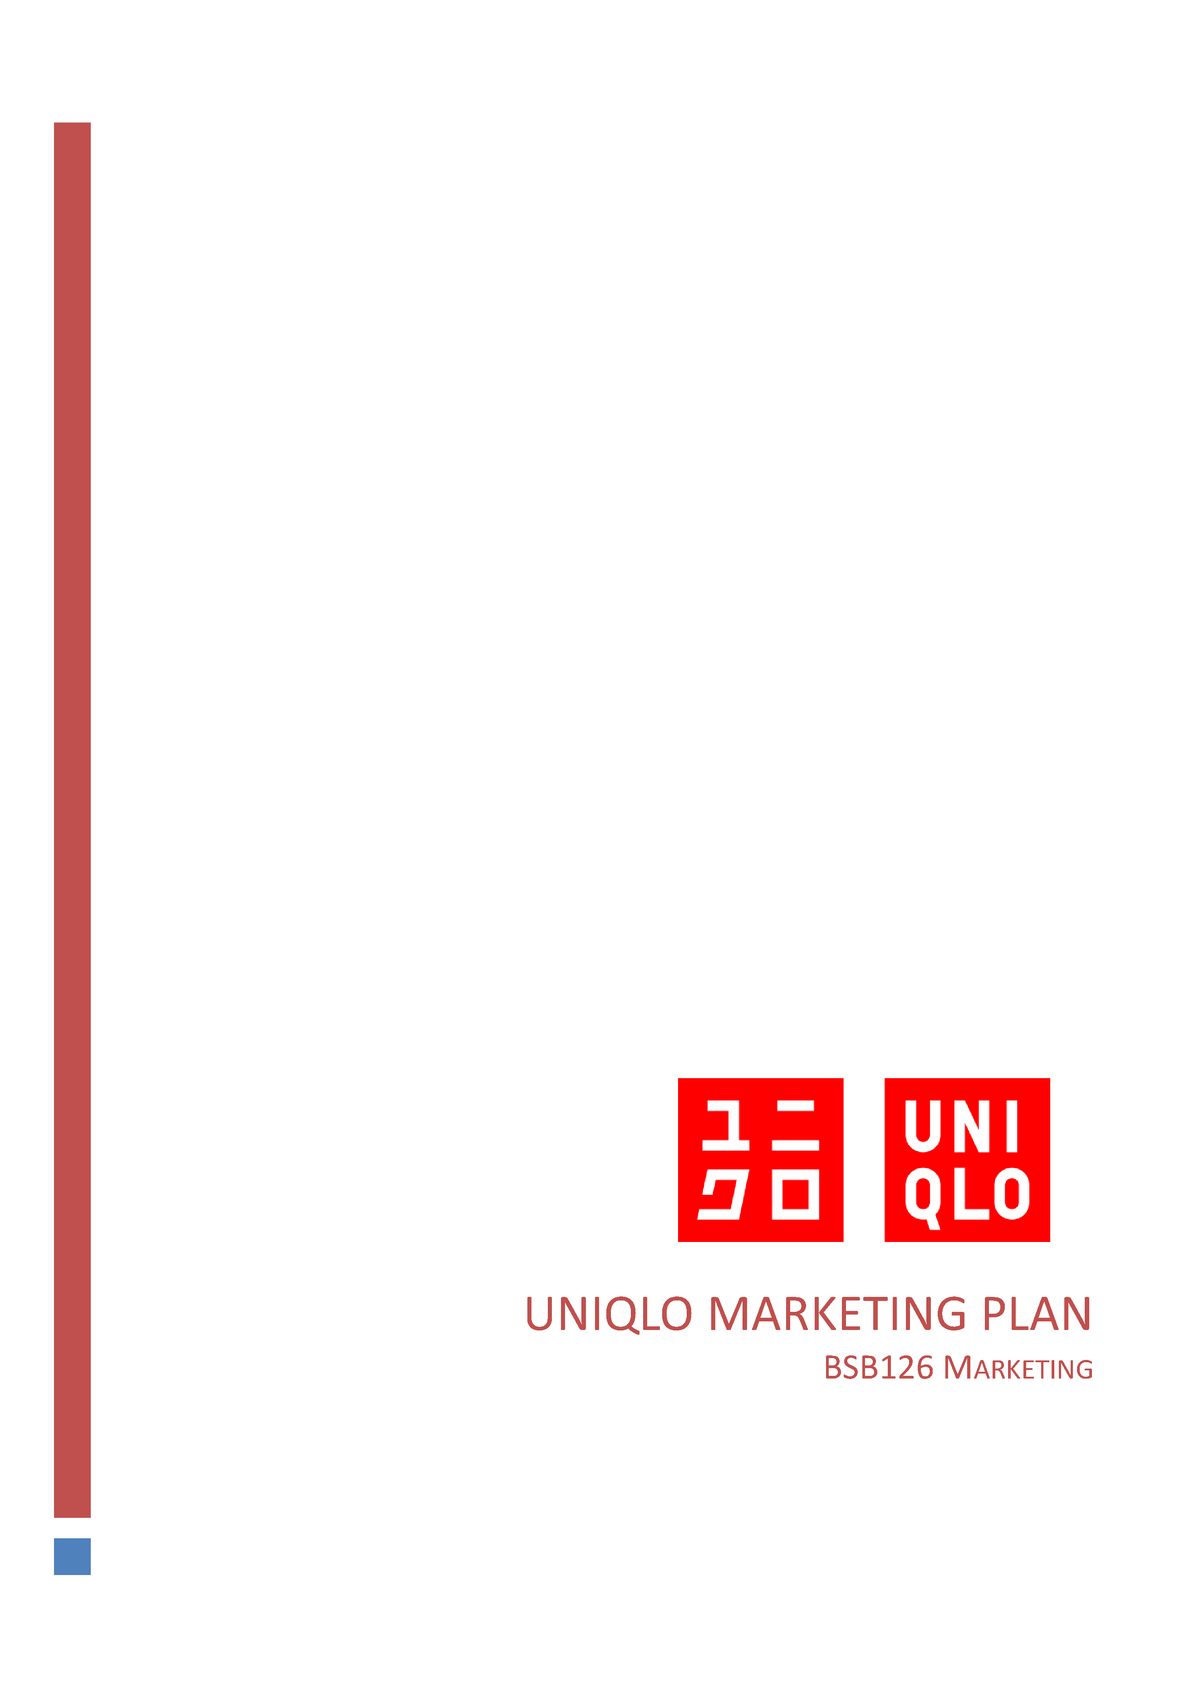 Uniqlo Pestle Analysisdocx  UNIQLO is a Japanese retail giant with  operations in over 25 countries its owned by fast retailing co UNIQLO  specializes  Course Hero